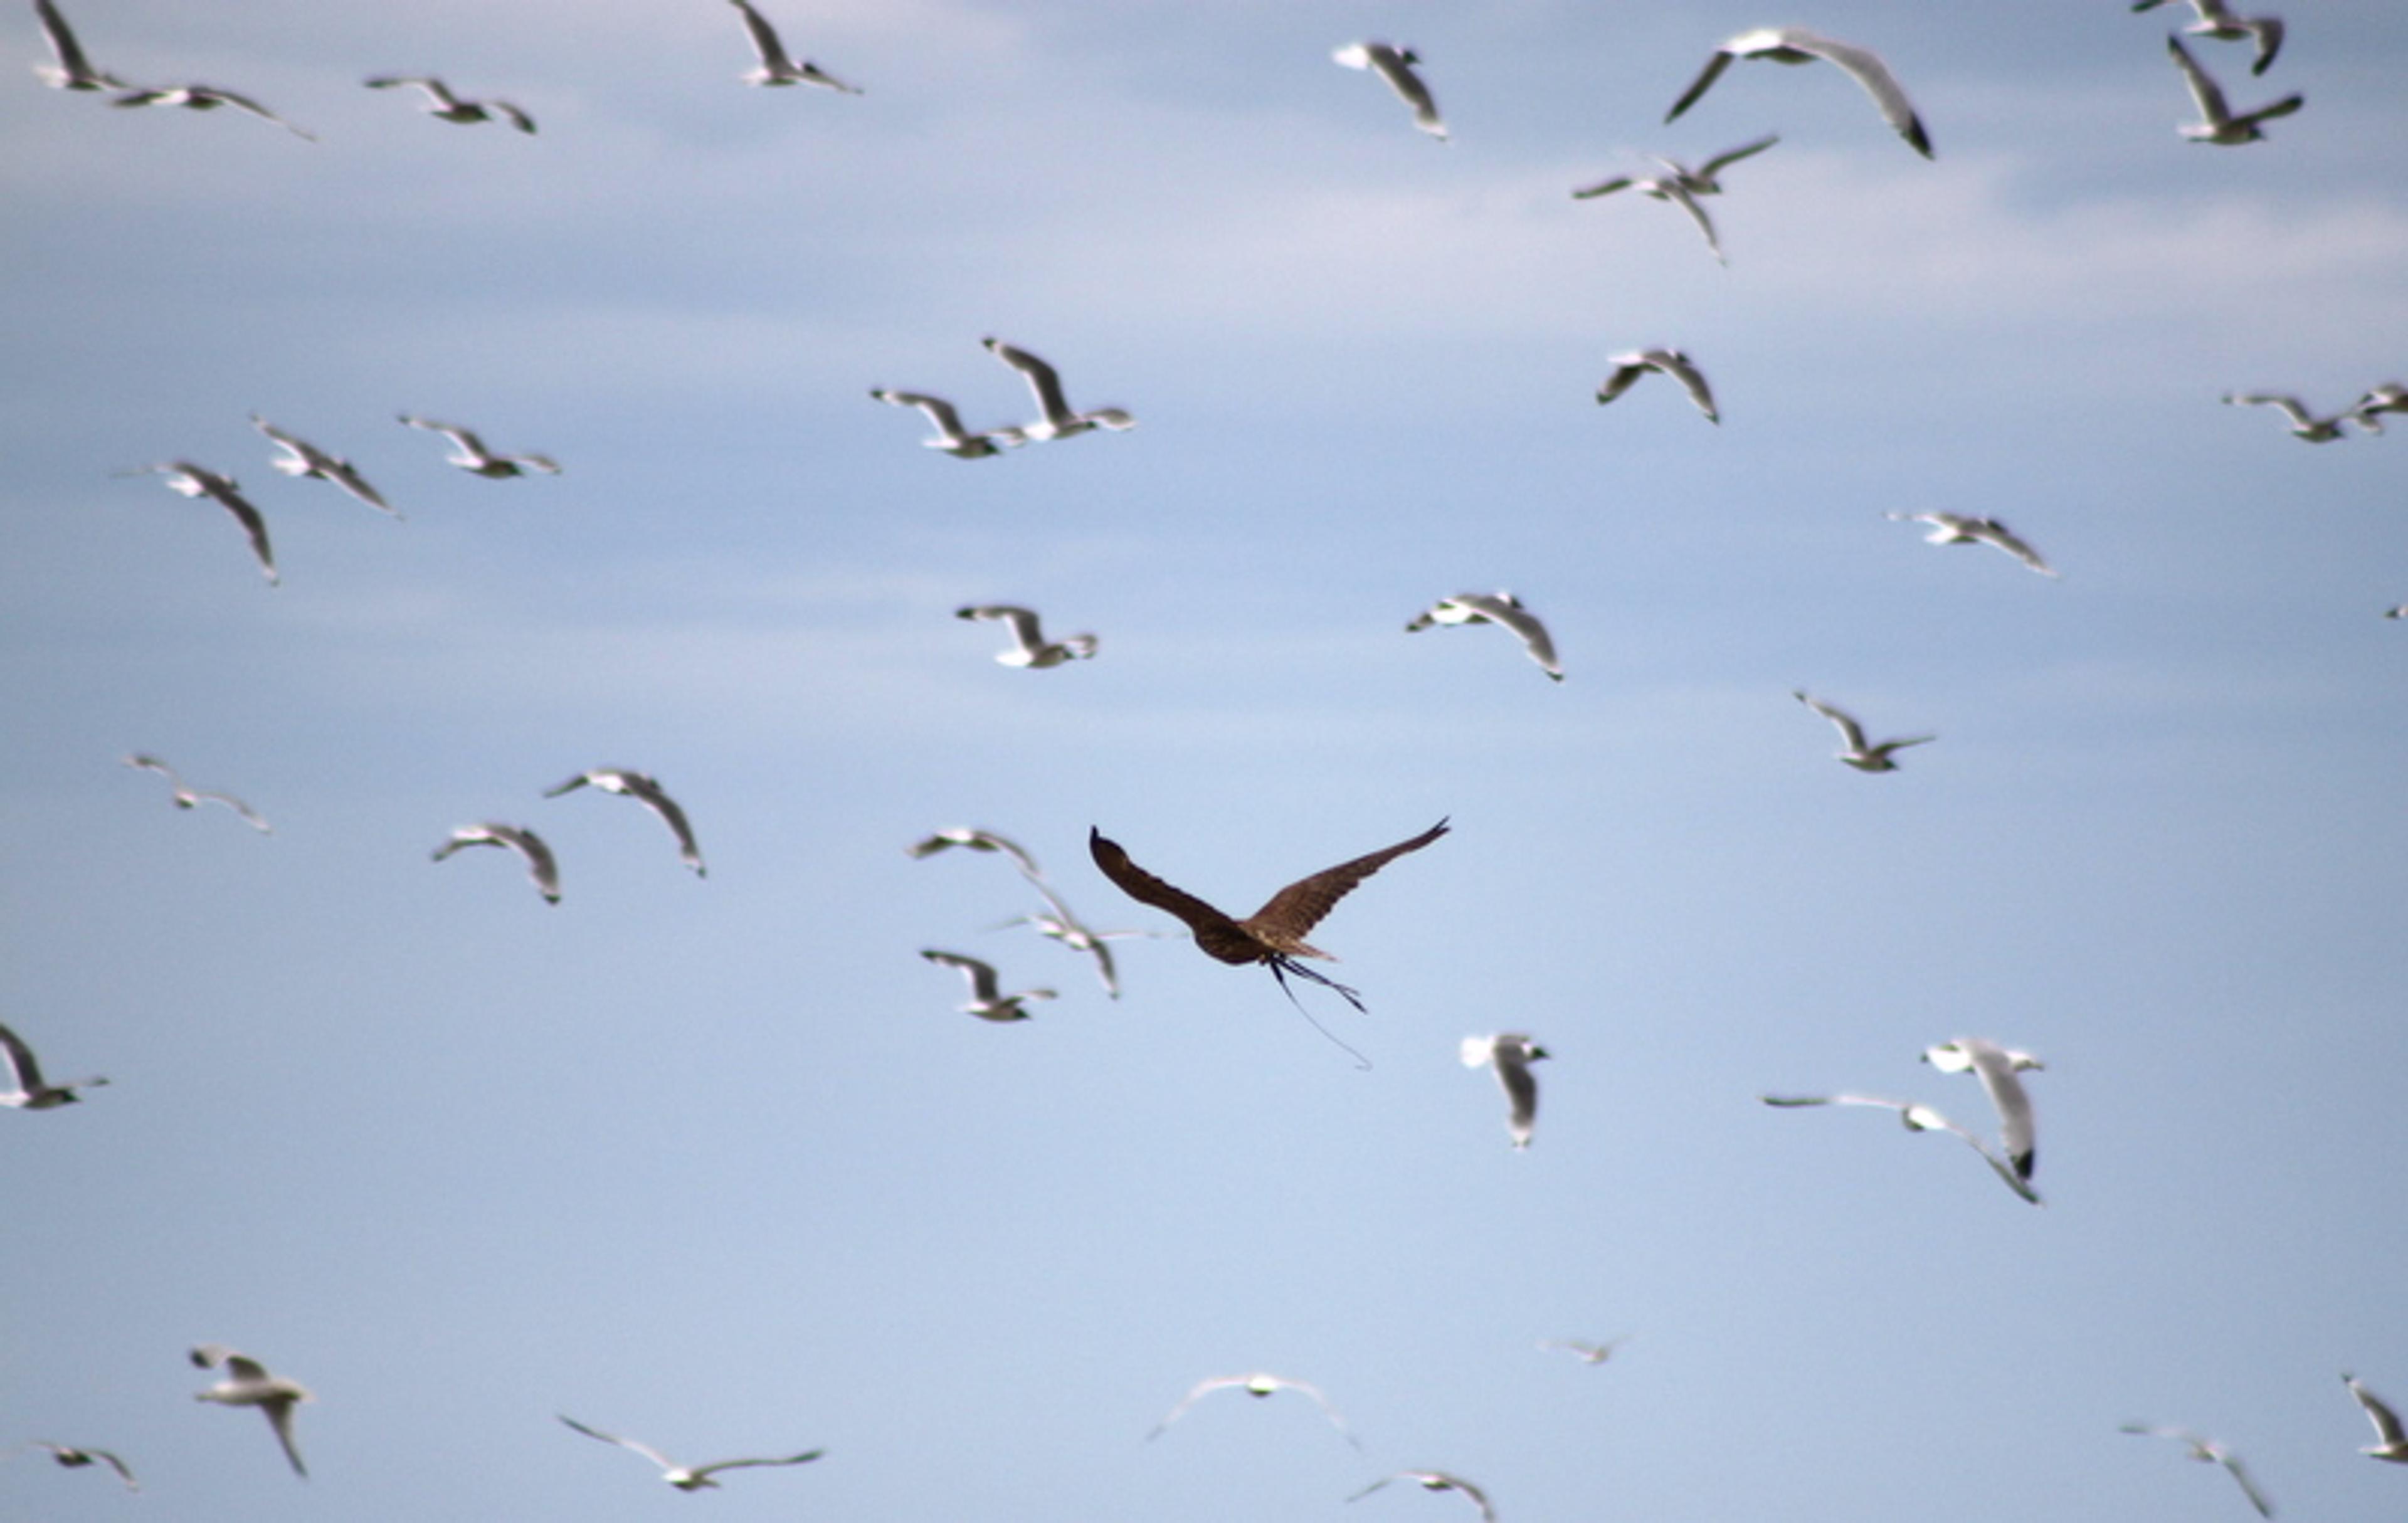 A falcon chases a flock of gulls